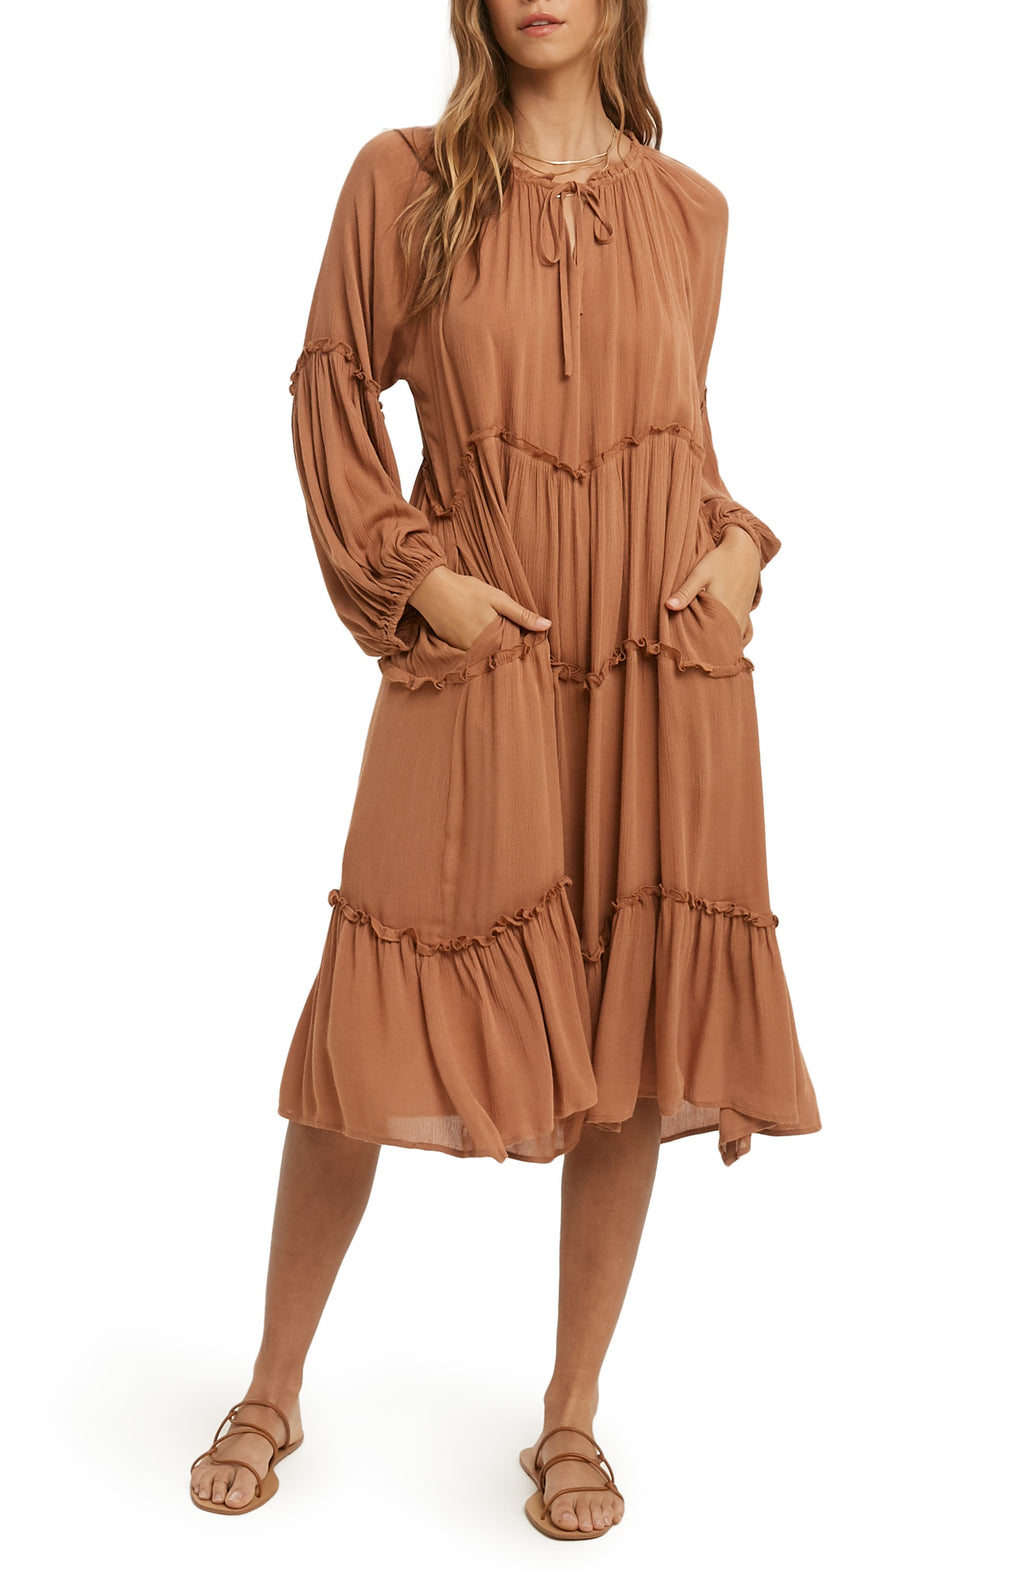 WISHLIST Notched Neck Long Sleeve Tiered Dress, Main, color, Brown